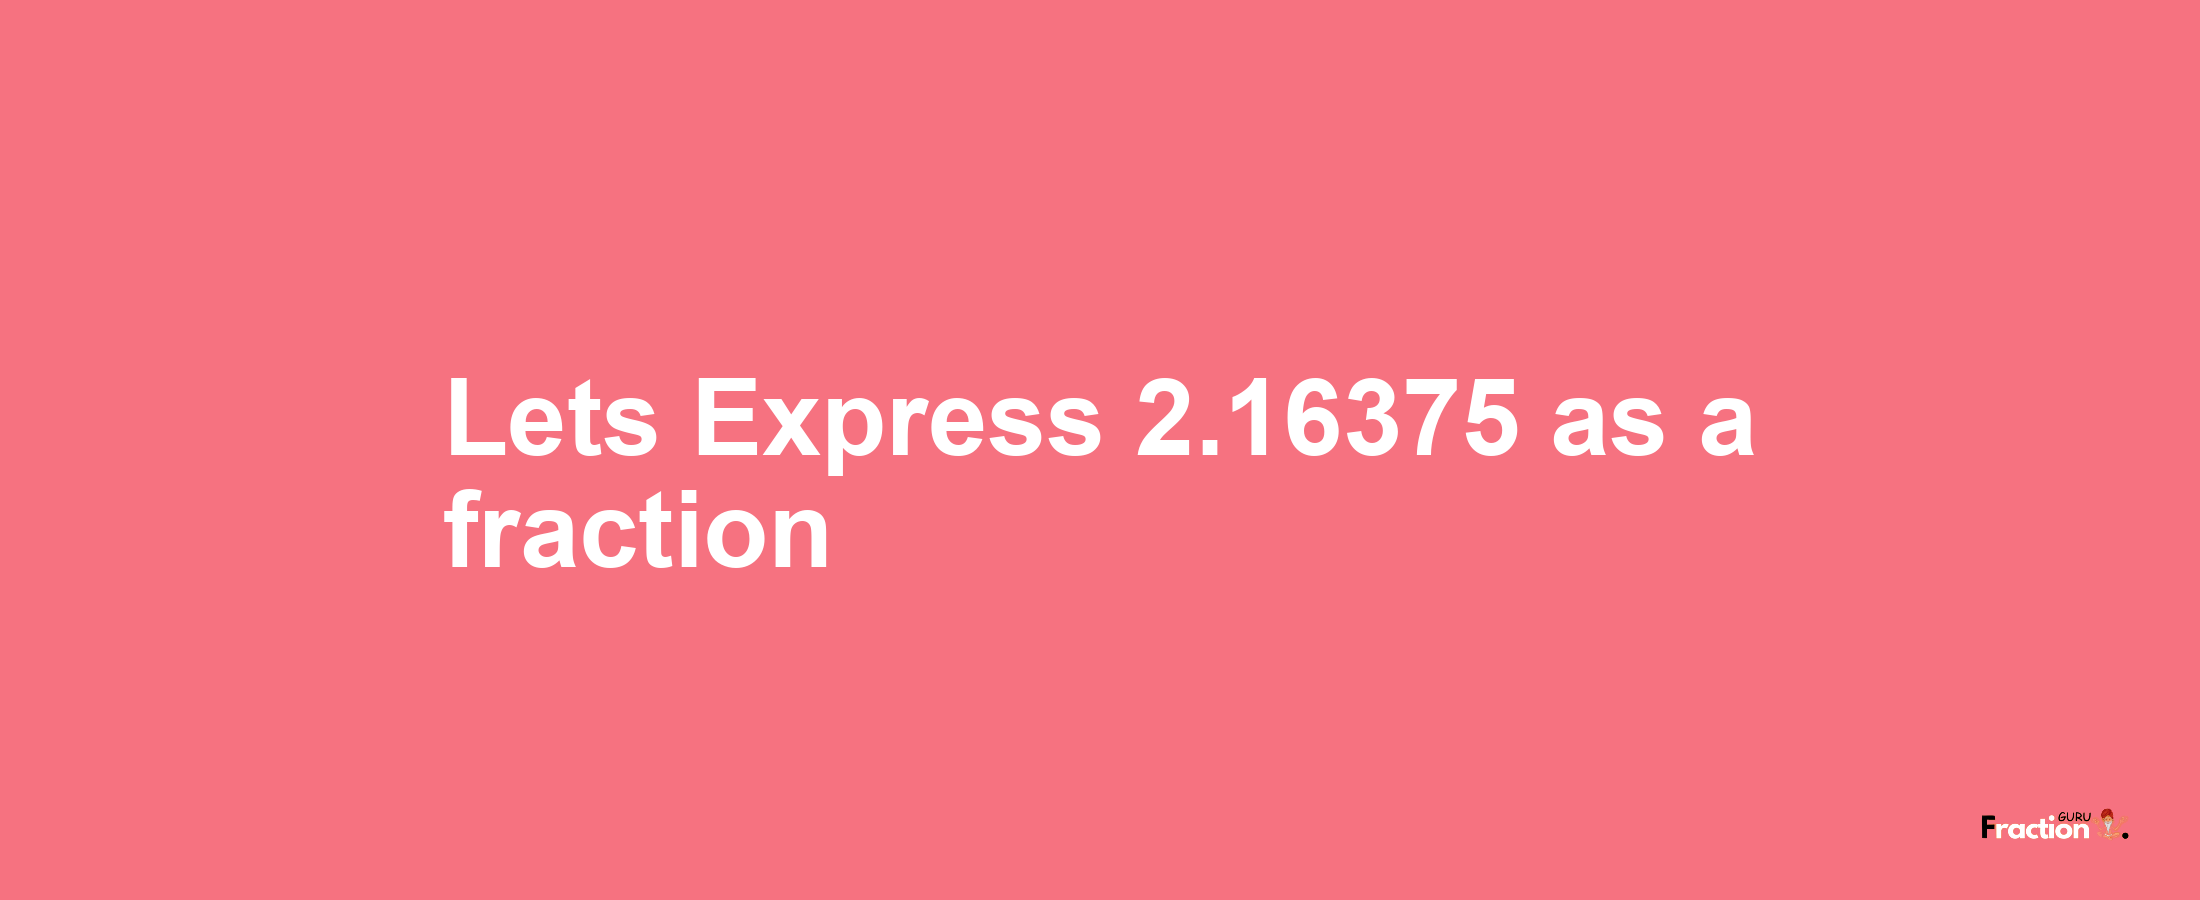 Lets Express 2.16375 as afraction